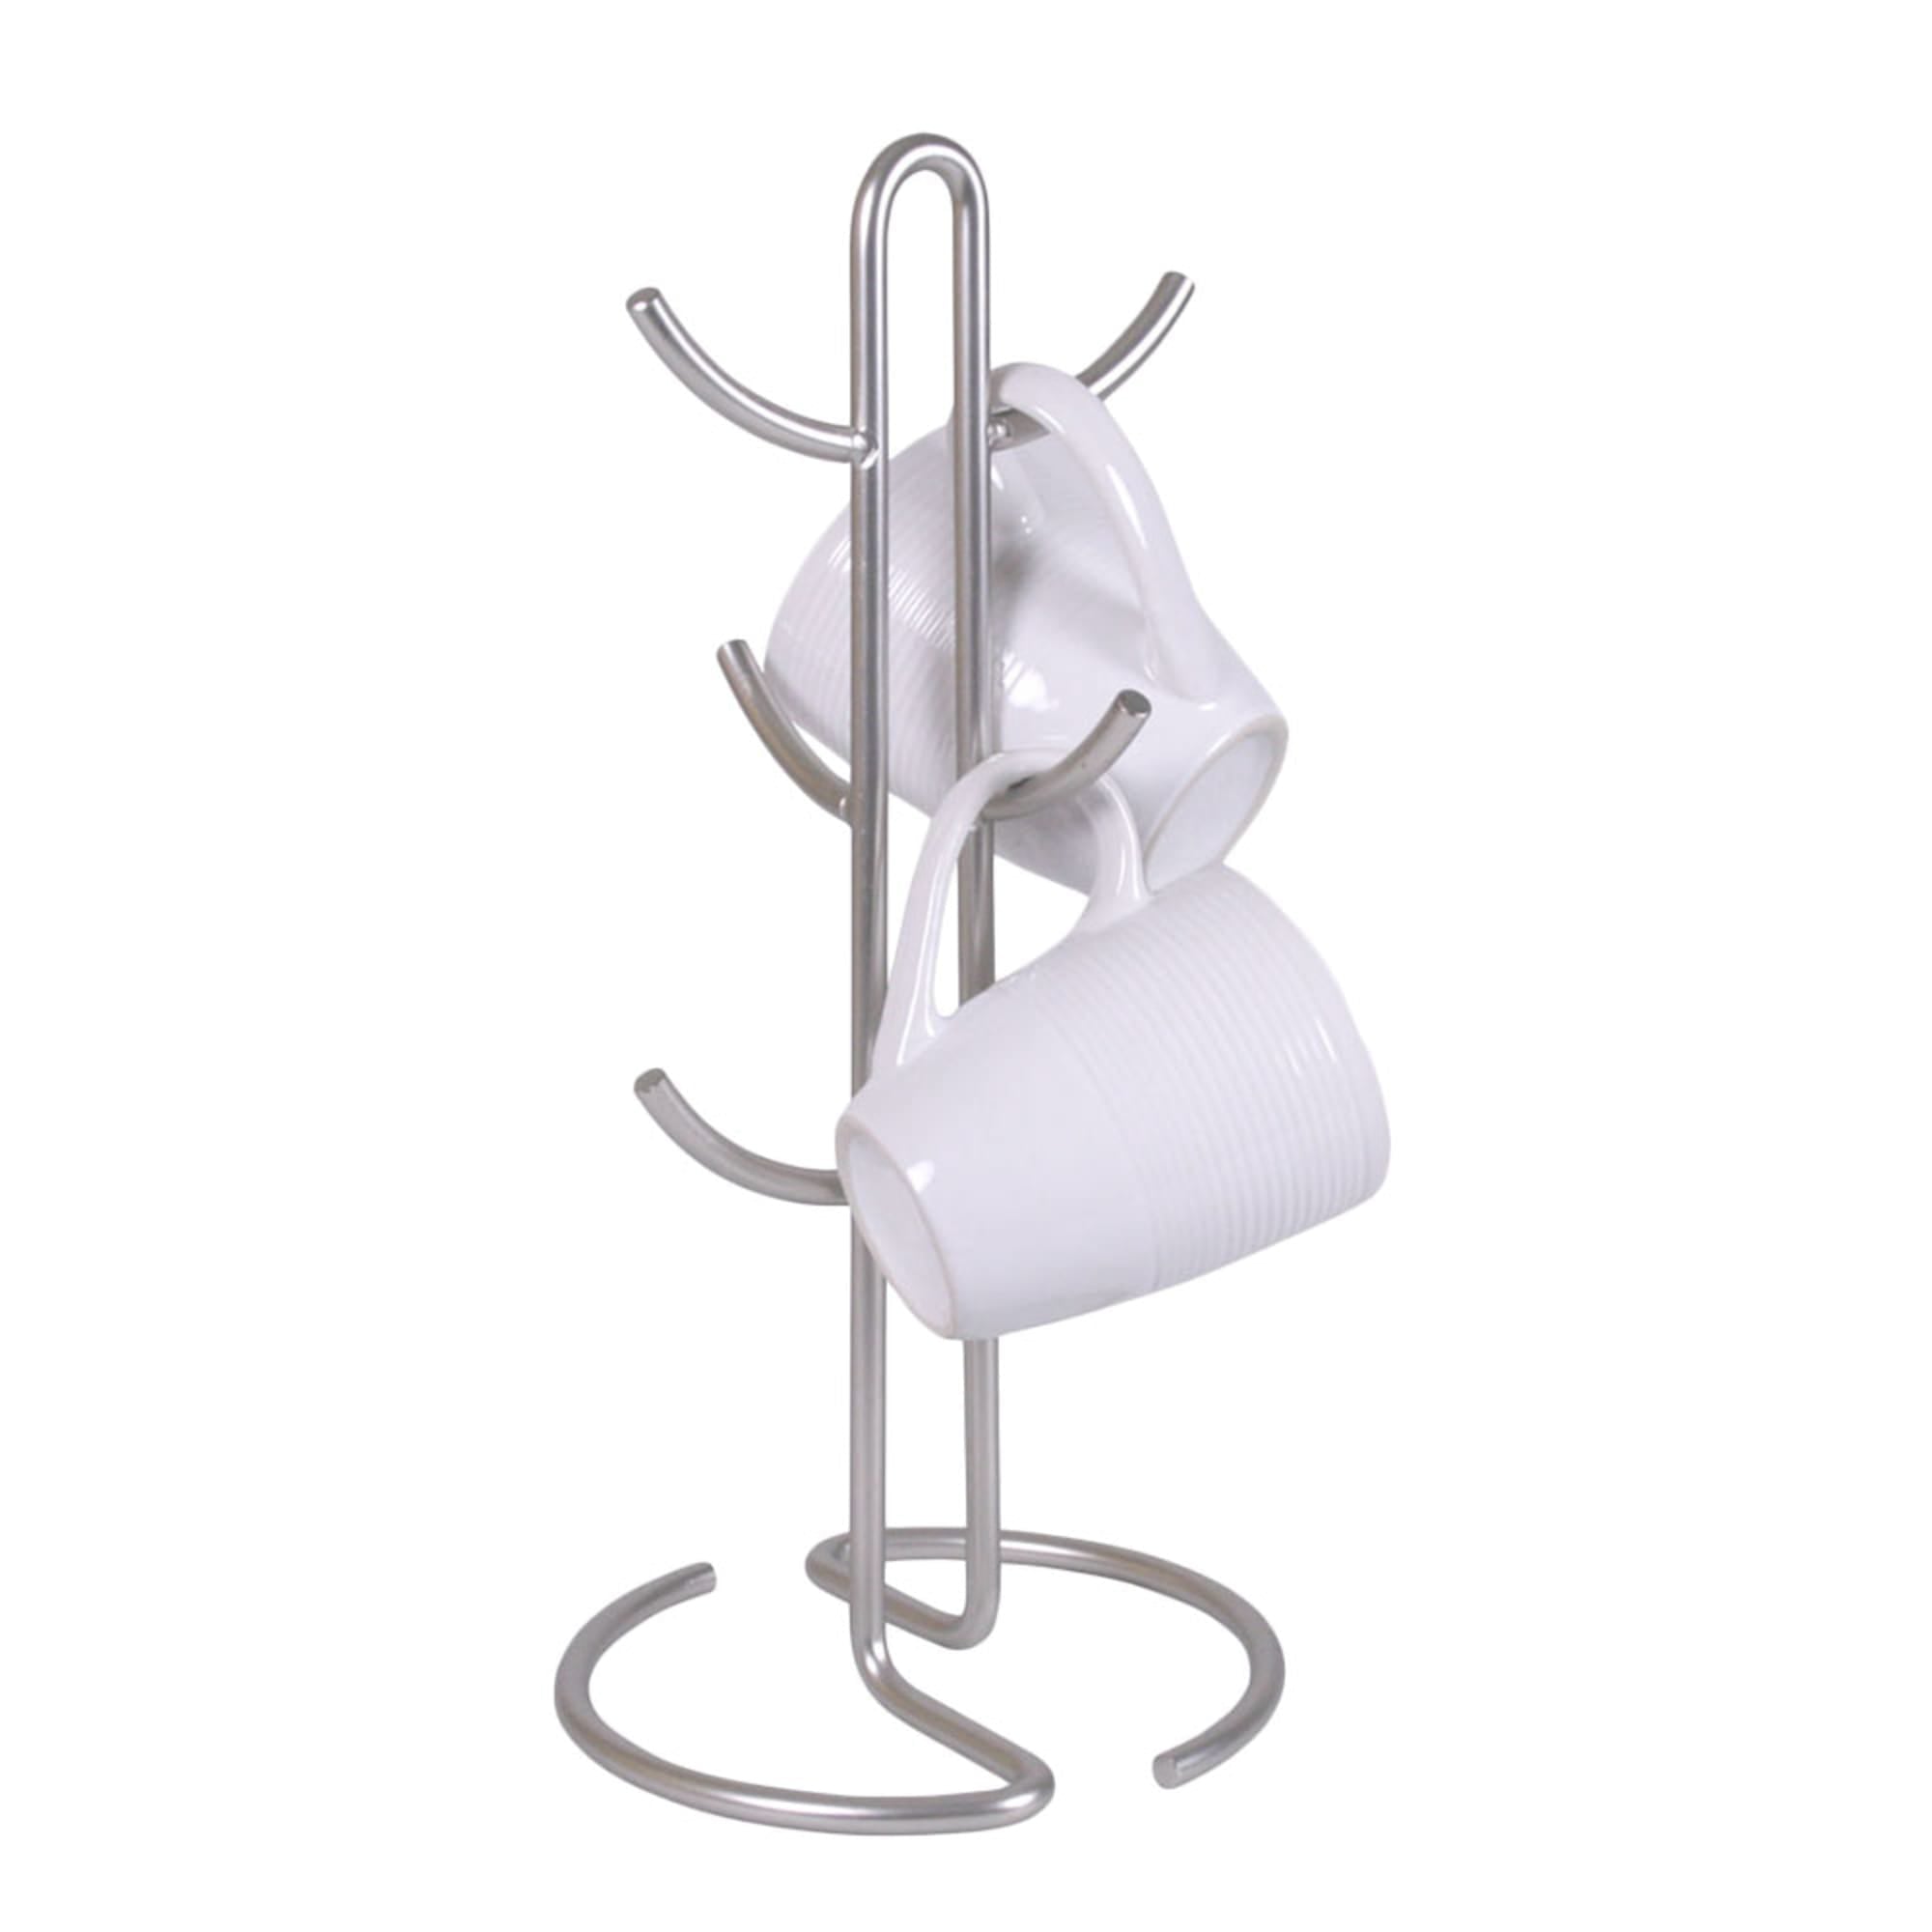 Home Basics Simplicity Collection 6 Hook Steel Mug Tree, Satin Nickel $10.00 EACH, CASE PACK OF 12